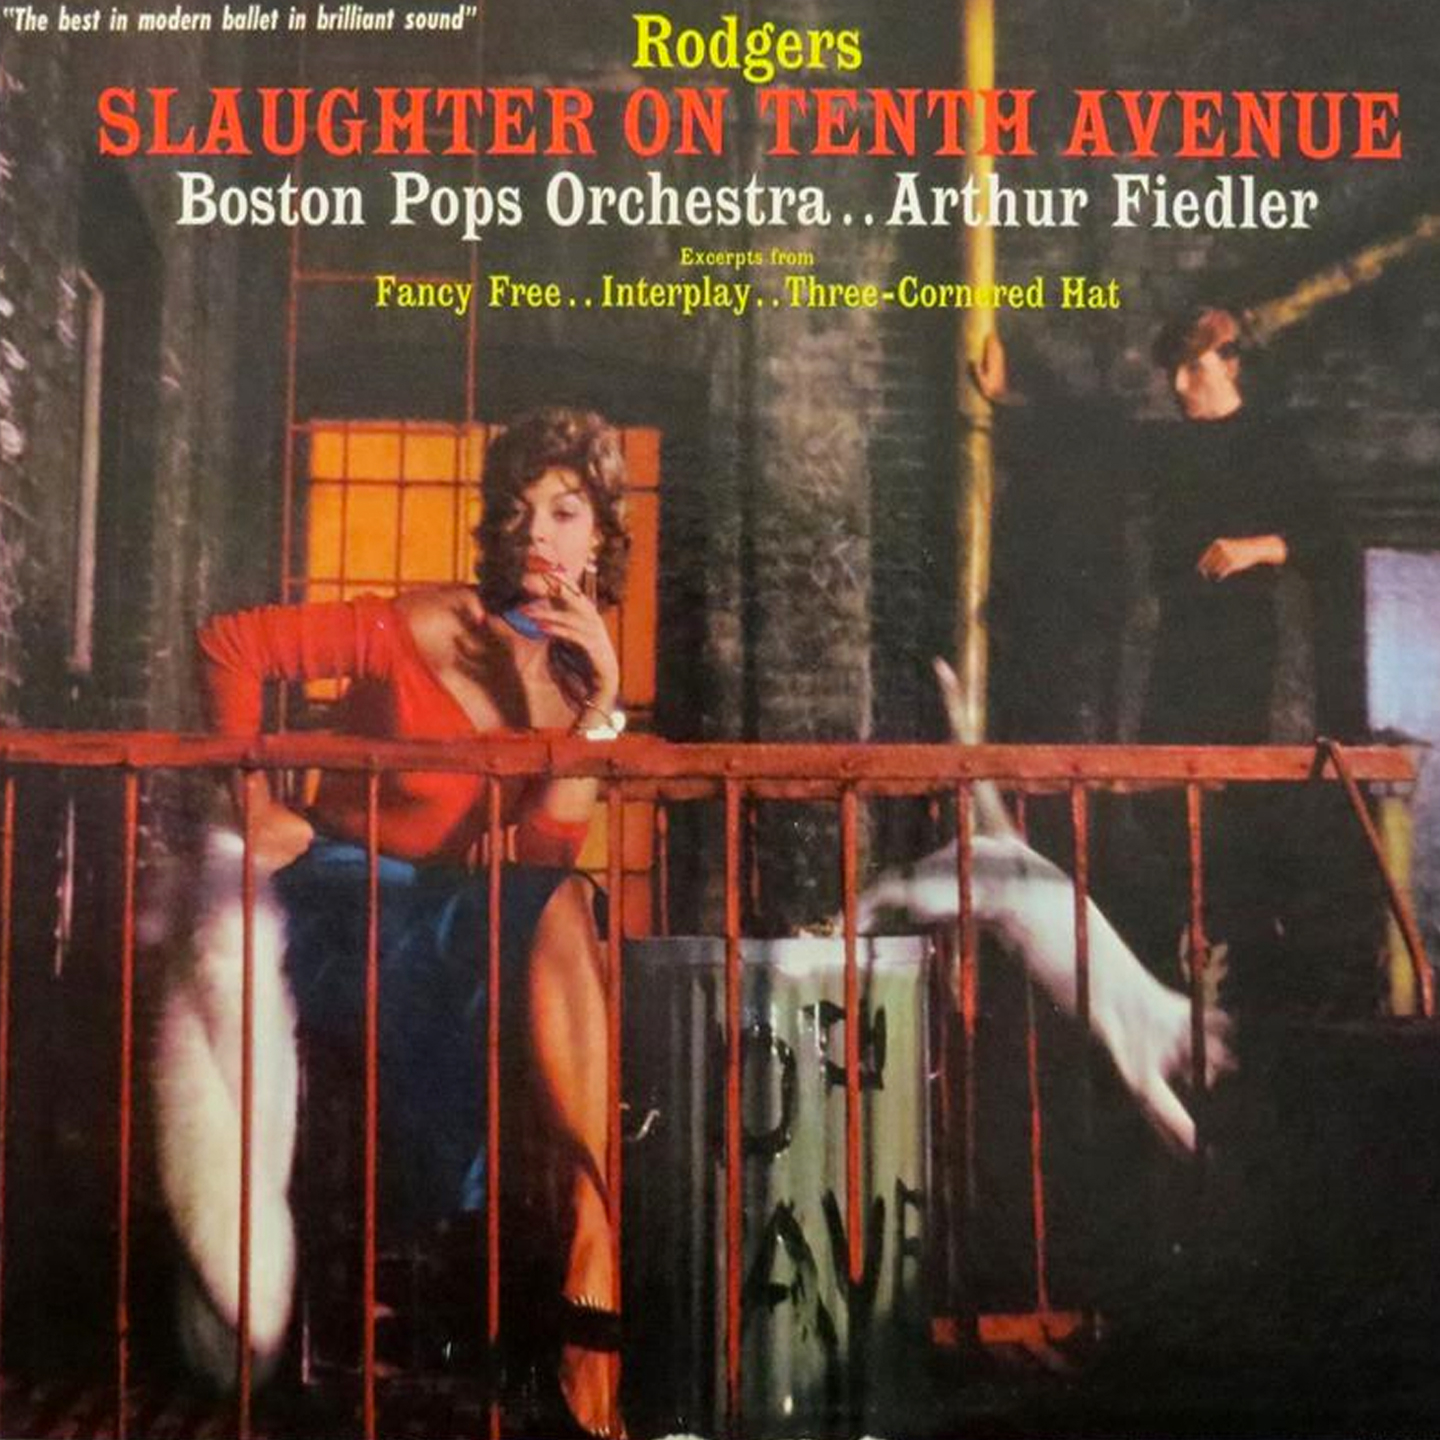 On Your Toes - Slaughter on Tenth Avenue